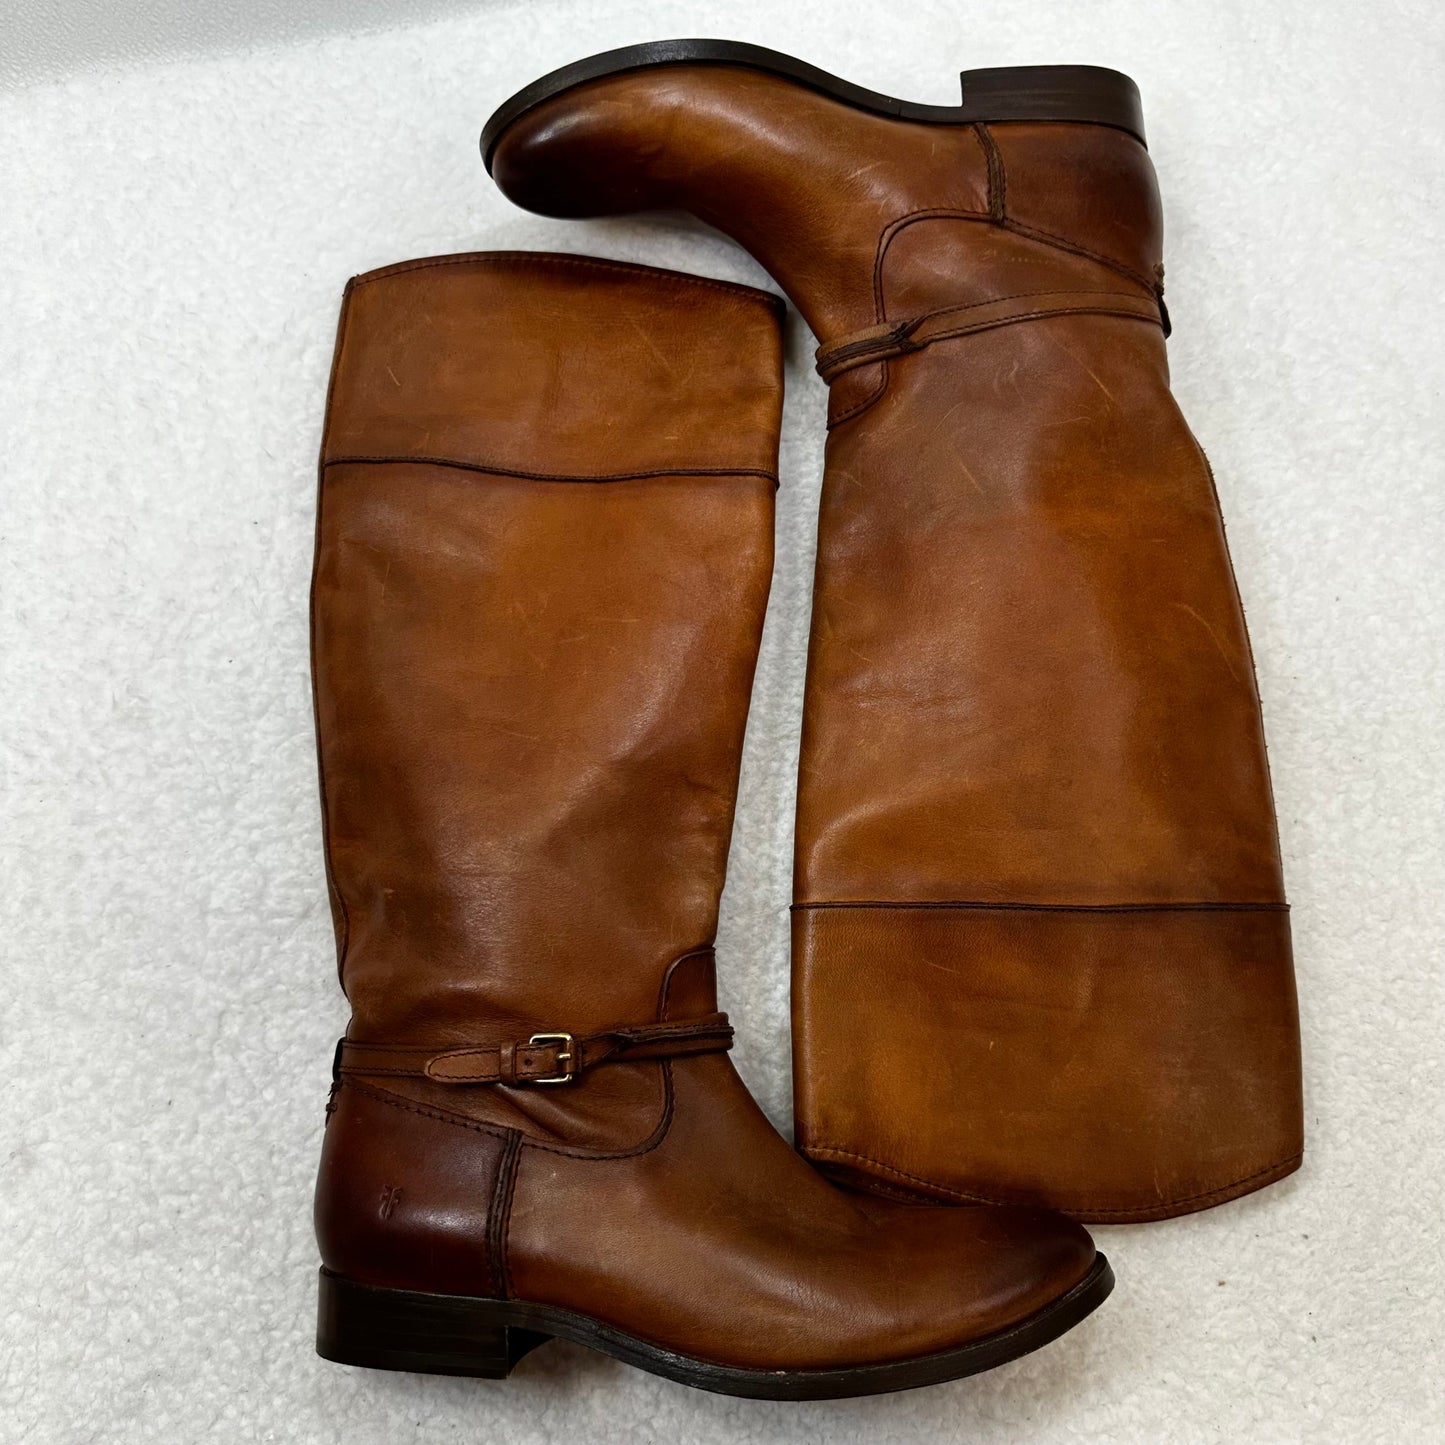 Brown Boots Knee Flats Frye, Size 7